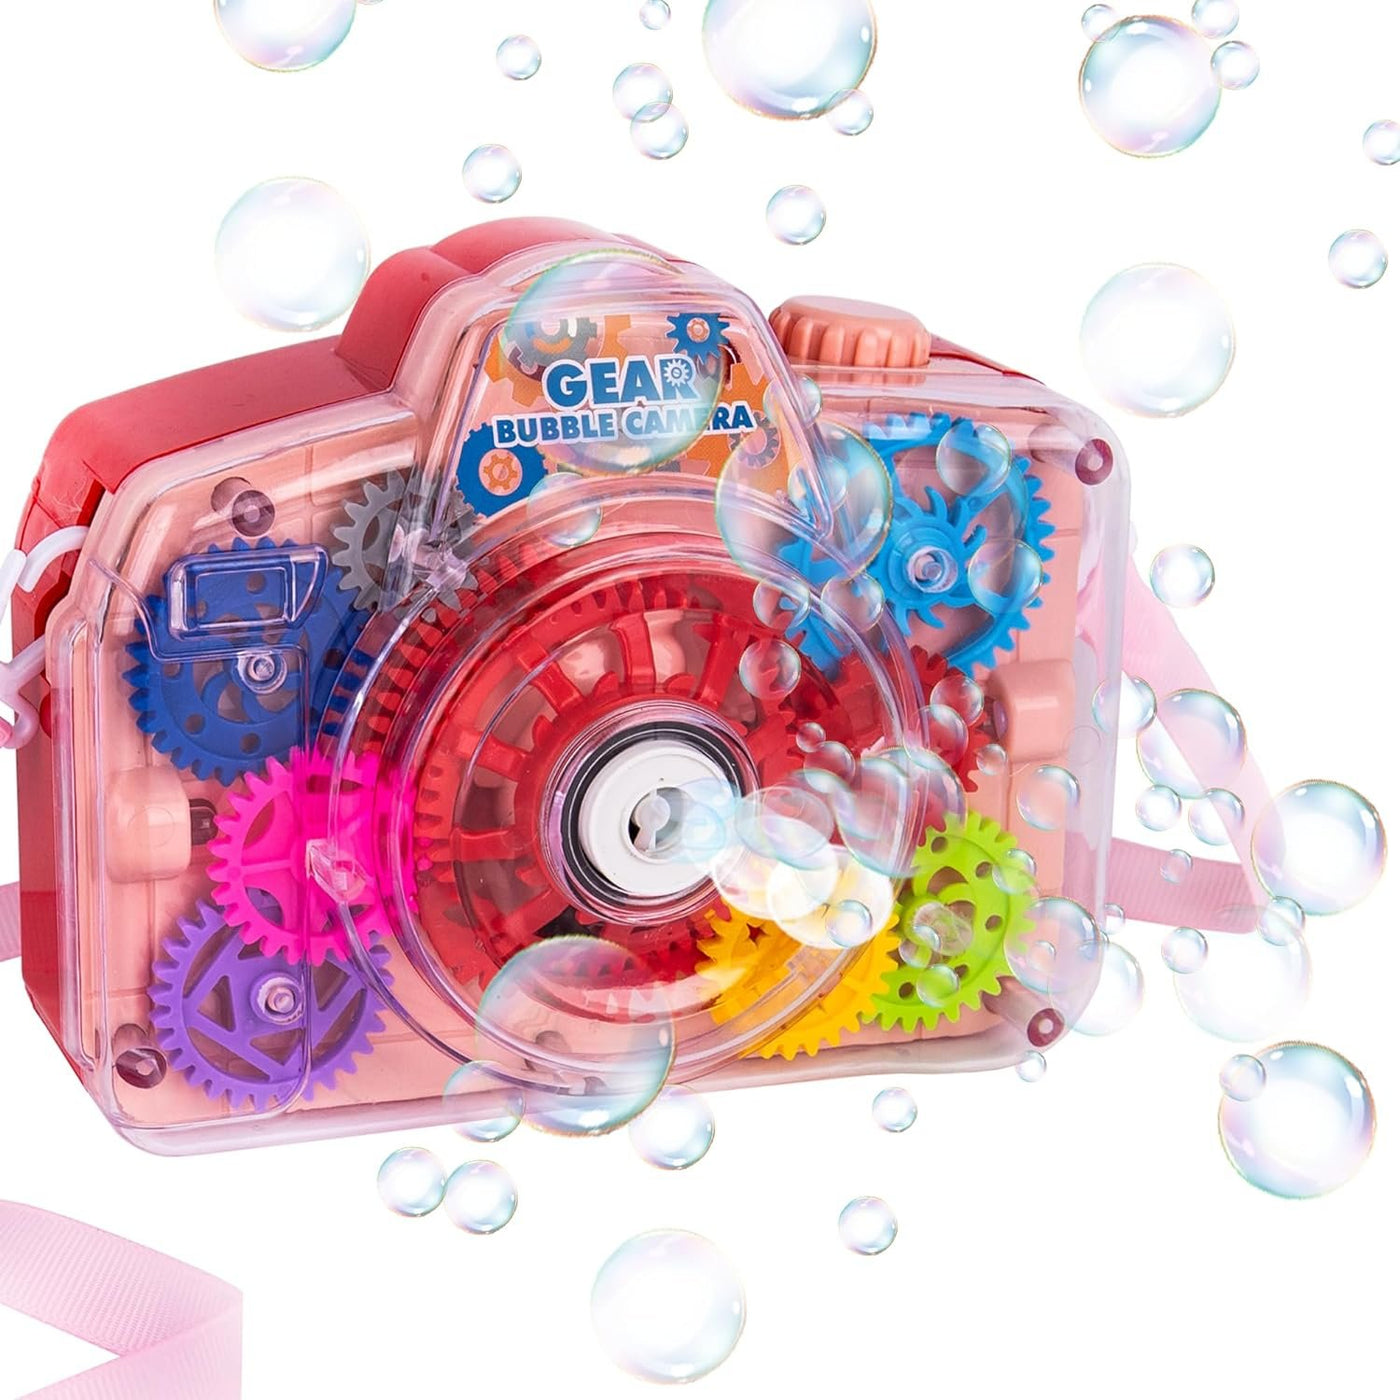 Bubble Camera Gear Toy, Toy Camera Bubble Machine with 9 Moving Gears, Neck, and Bubble Solution - Small Bubble Machine with Music and Lights for Extra Fun, Cute Bubble Makers for Kids